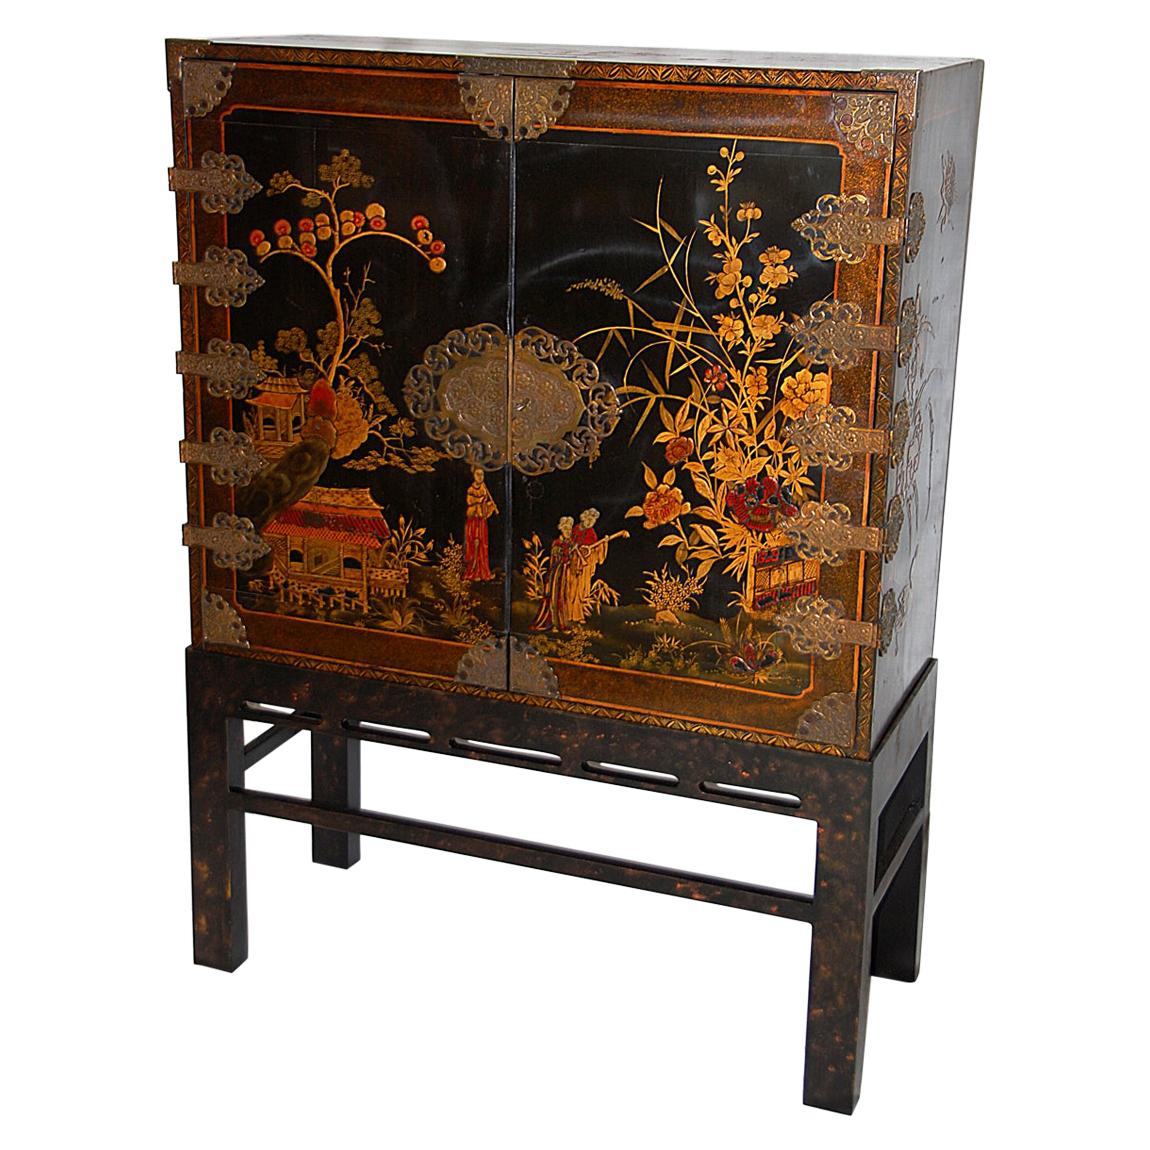 English 19th Century Black Lacquered Japanned Cabinet, Naturalistic Decoration